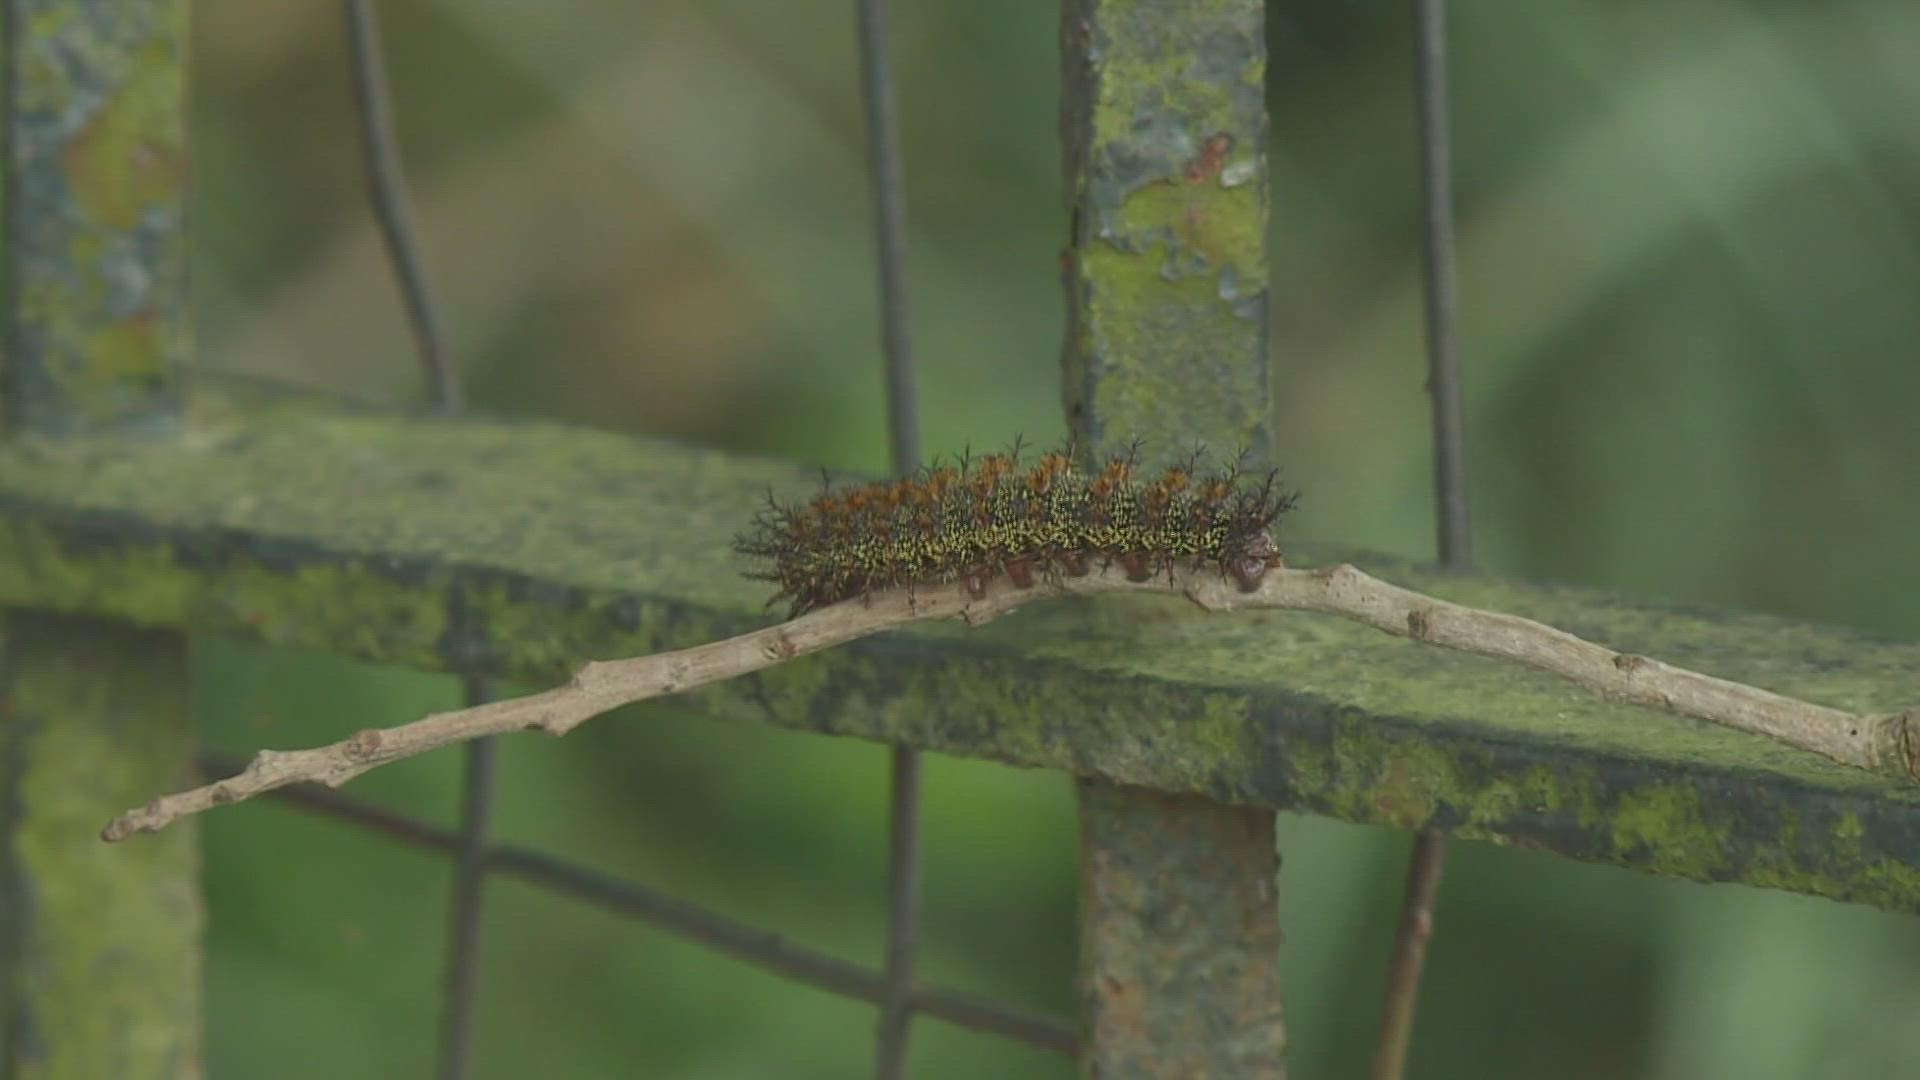 Springtime in the city means the return of the Buck Moth caterpillars.